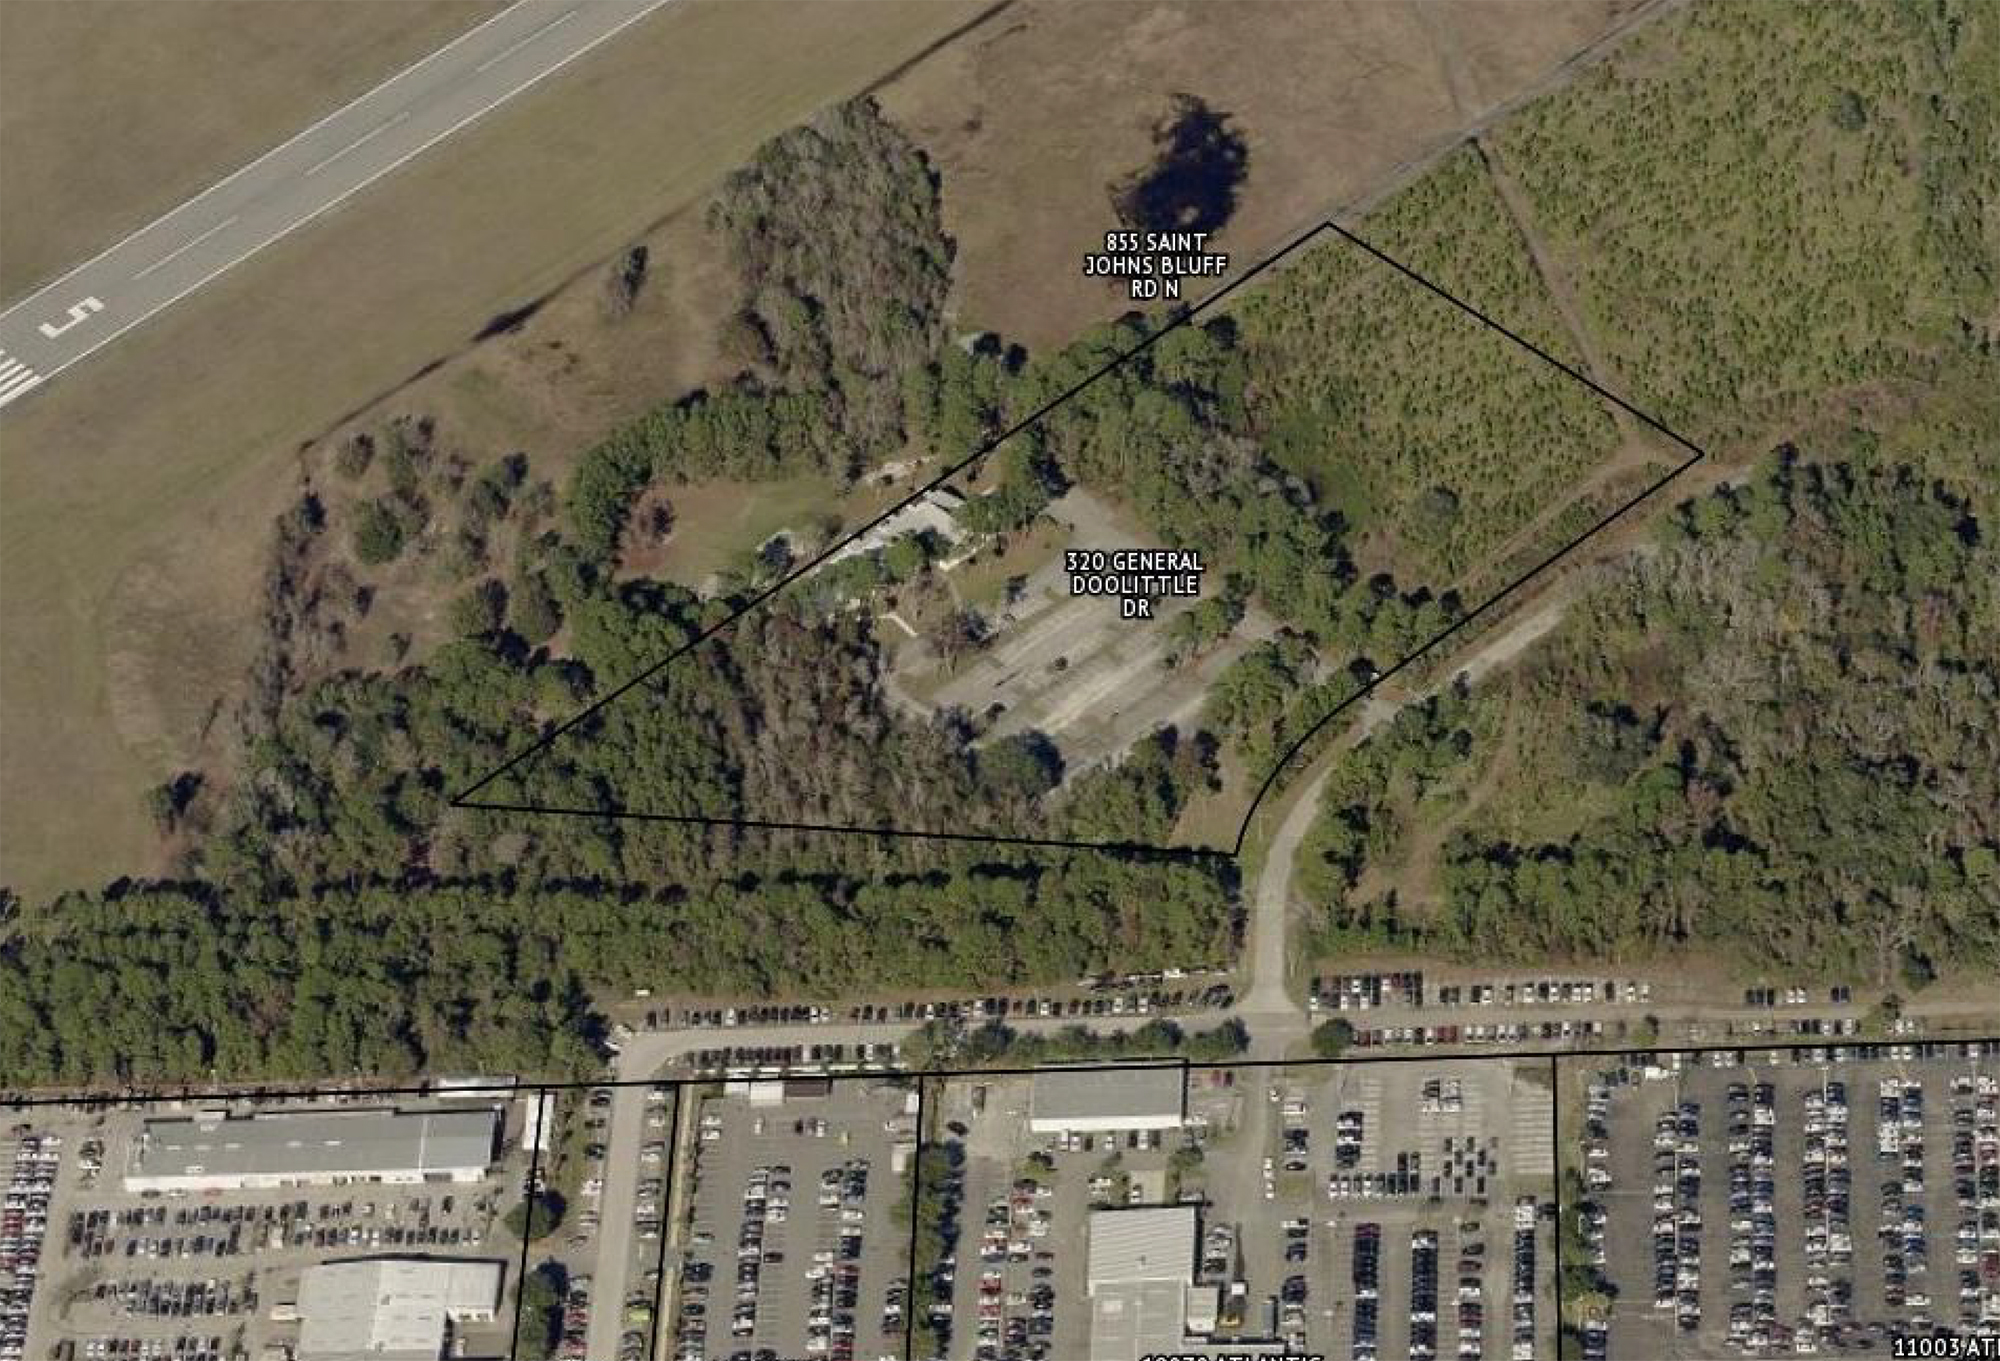 The 9.3-acre former restaurant site is behind the Arlington Toyota and George Moore Chevrolet car dealerships on Atlantic Boulevard.  The runway for Craig Field is shown in the top left.